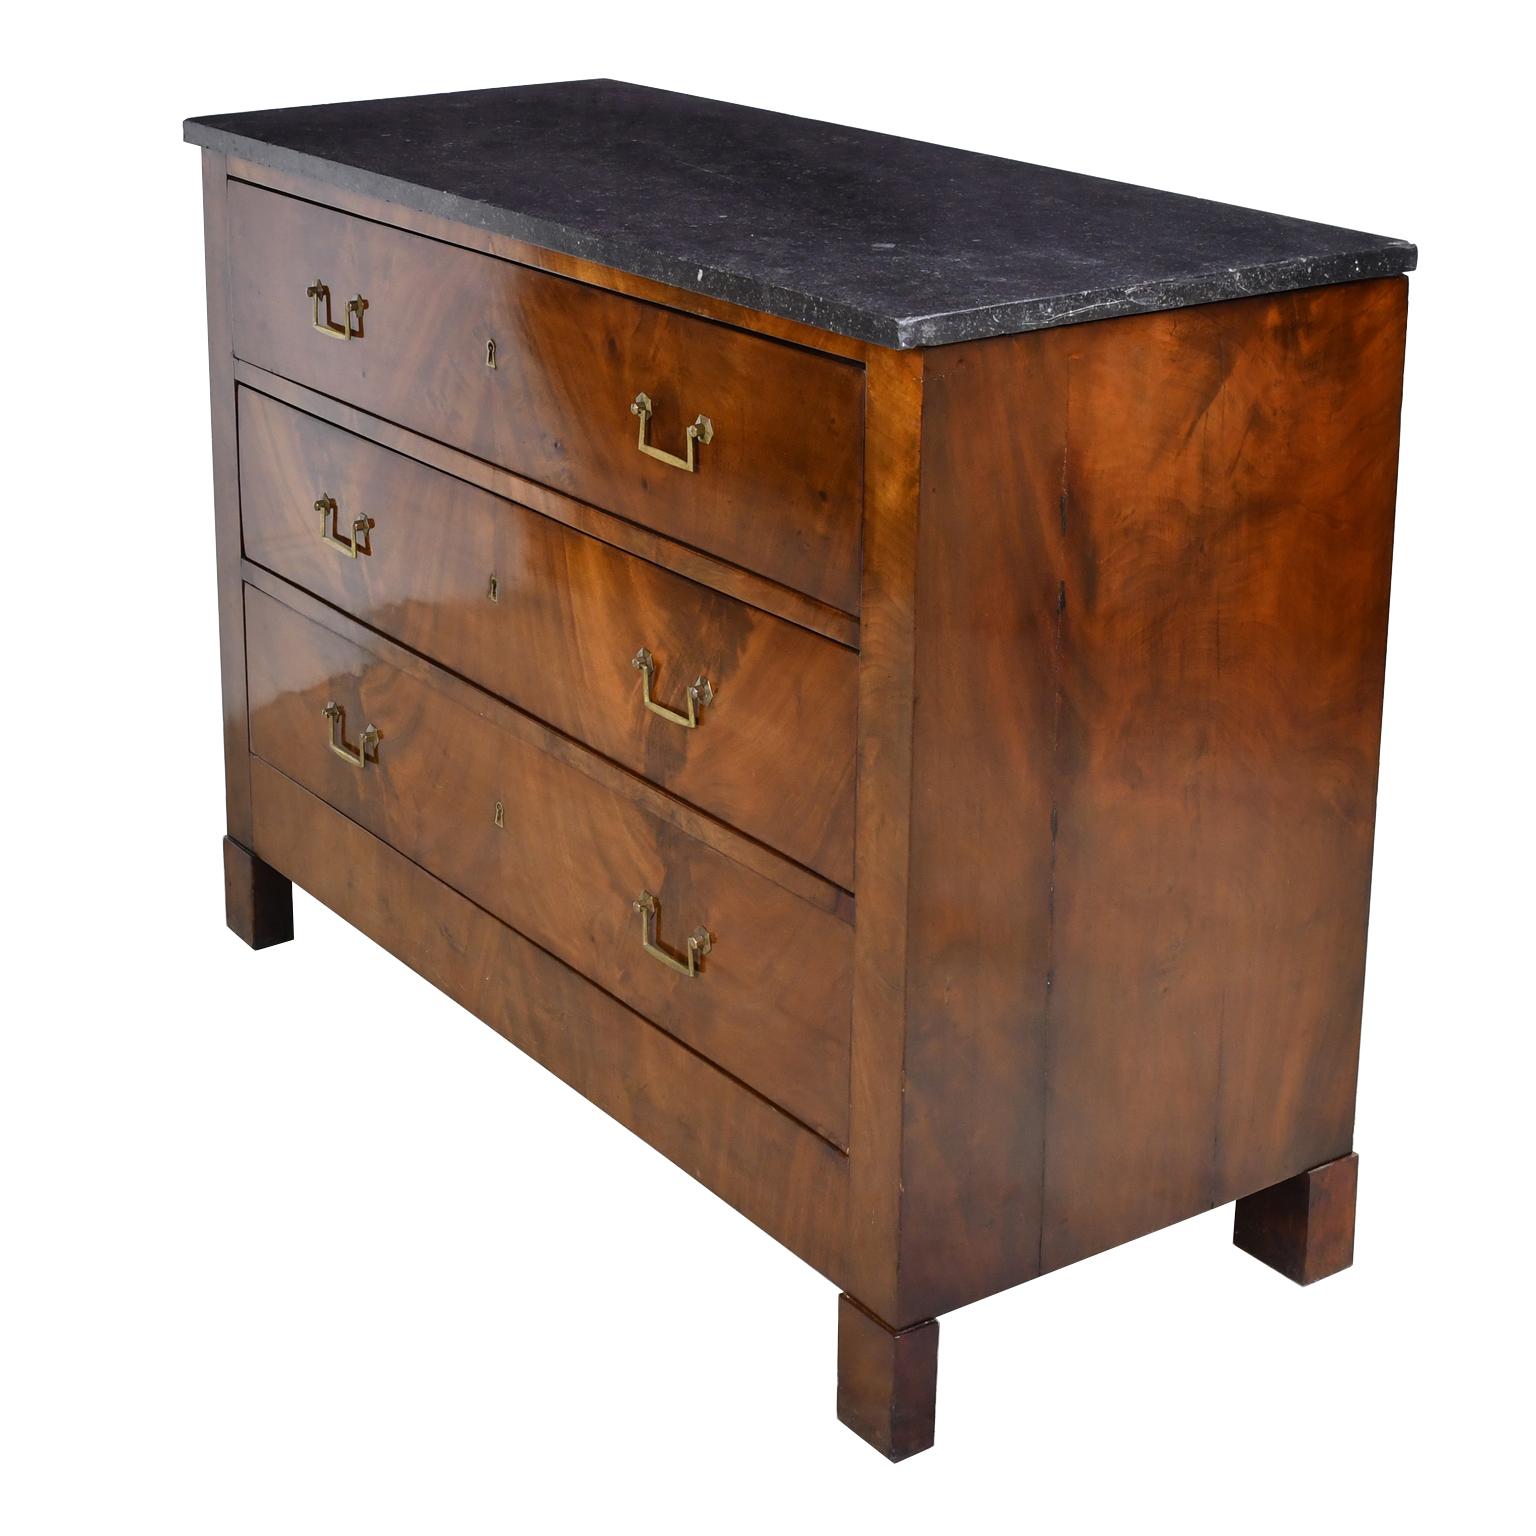 Cast French Directoire West Indies Mahogany Chest of Drawers with Black Marble